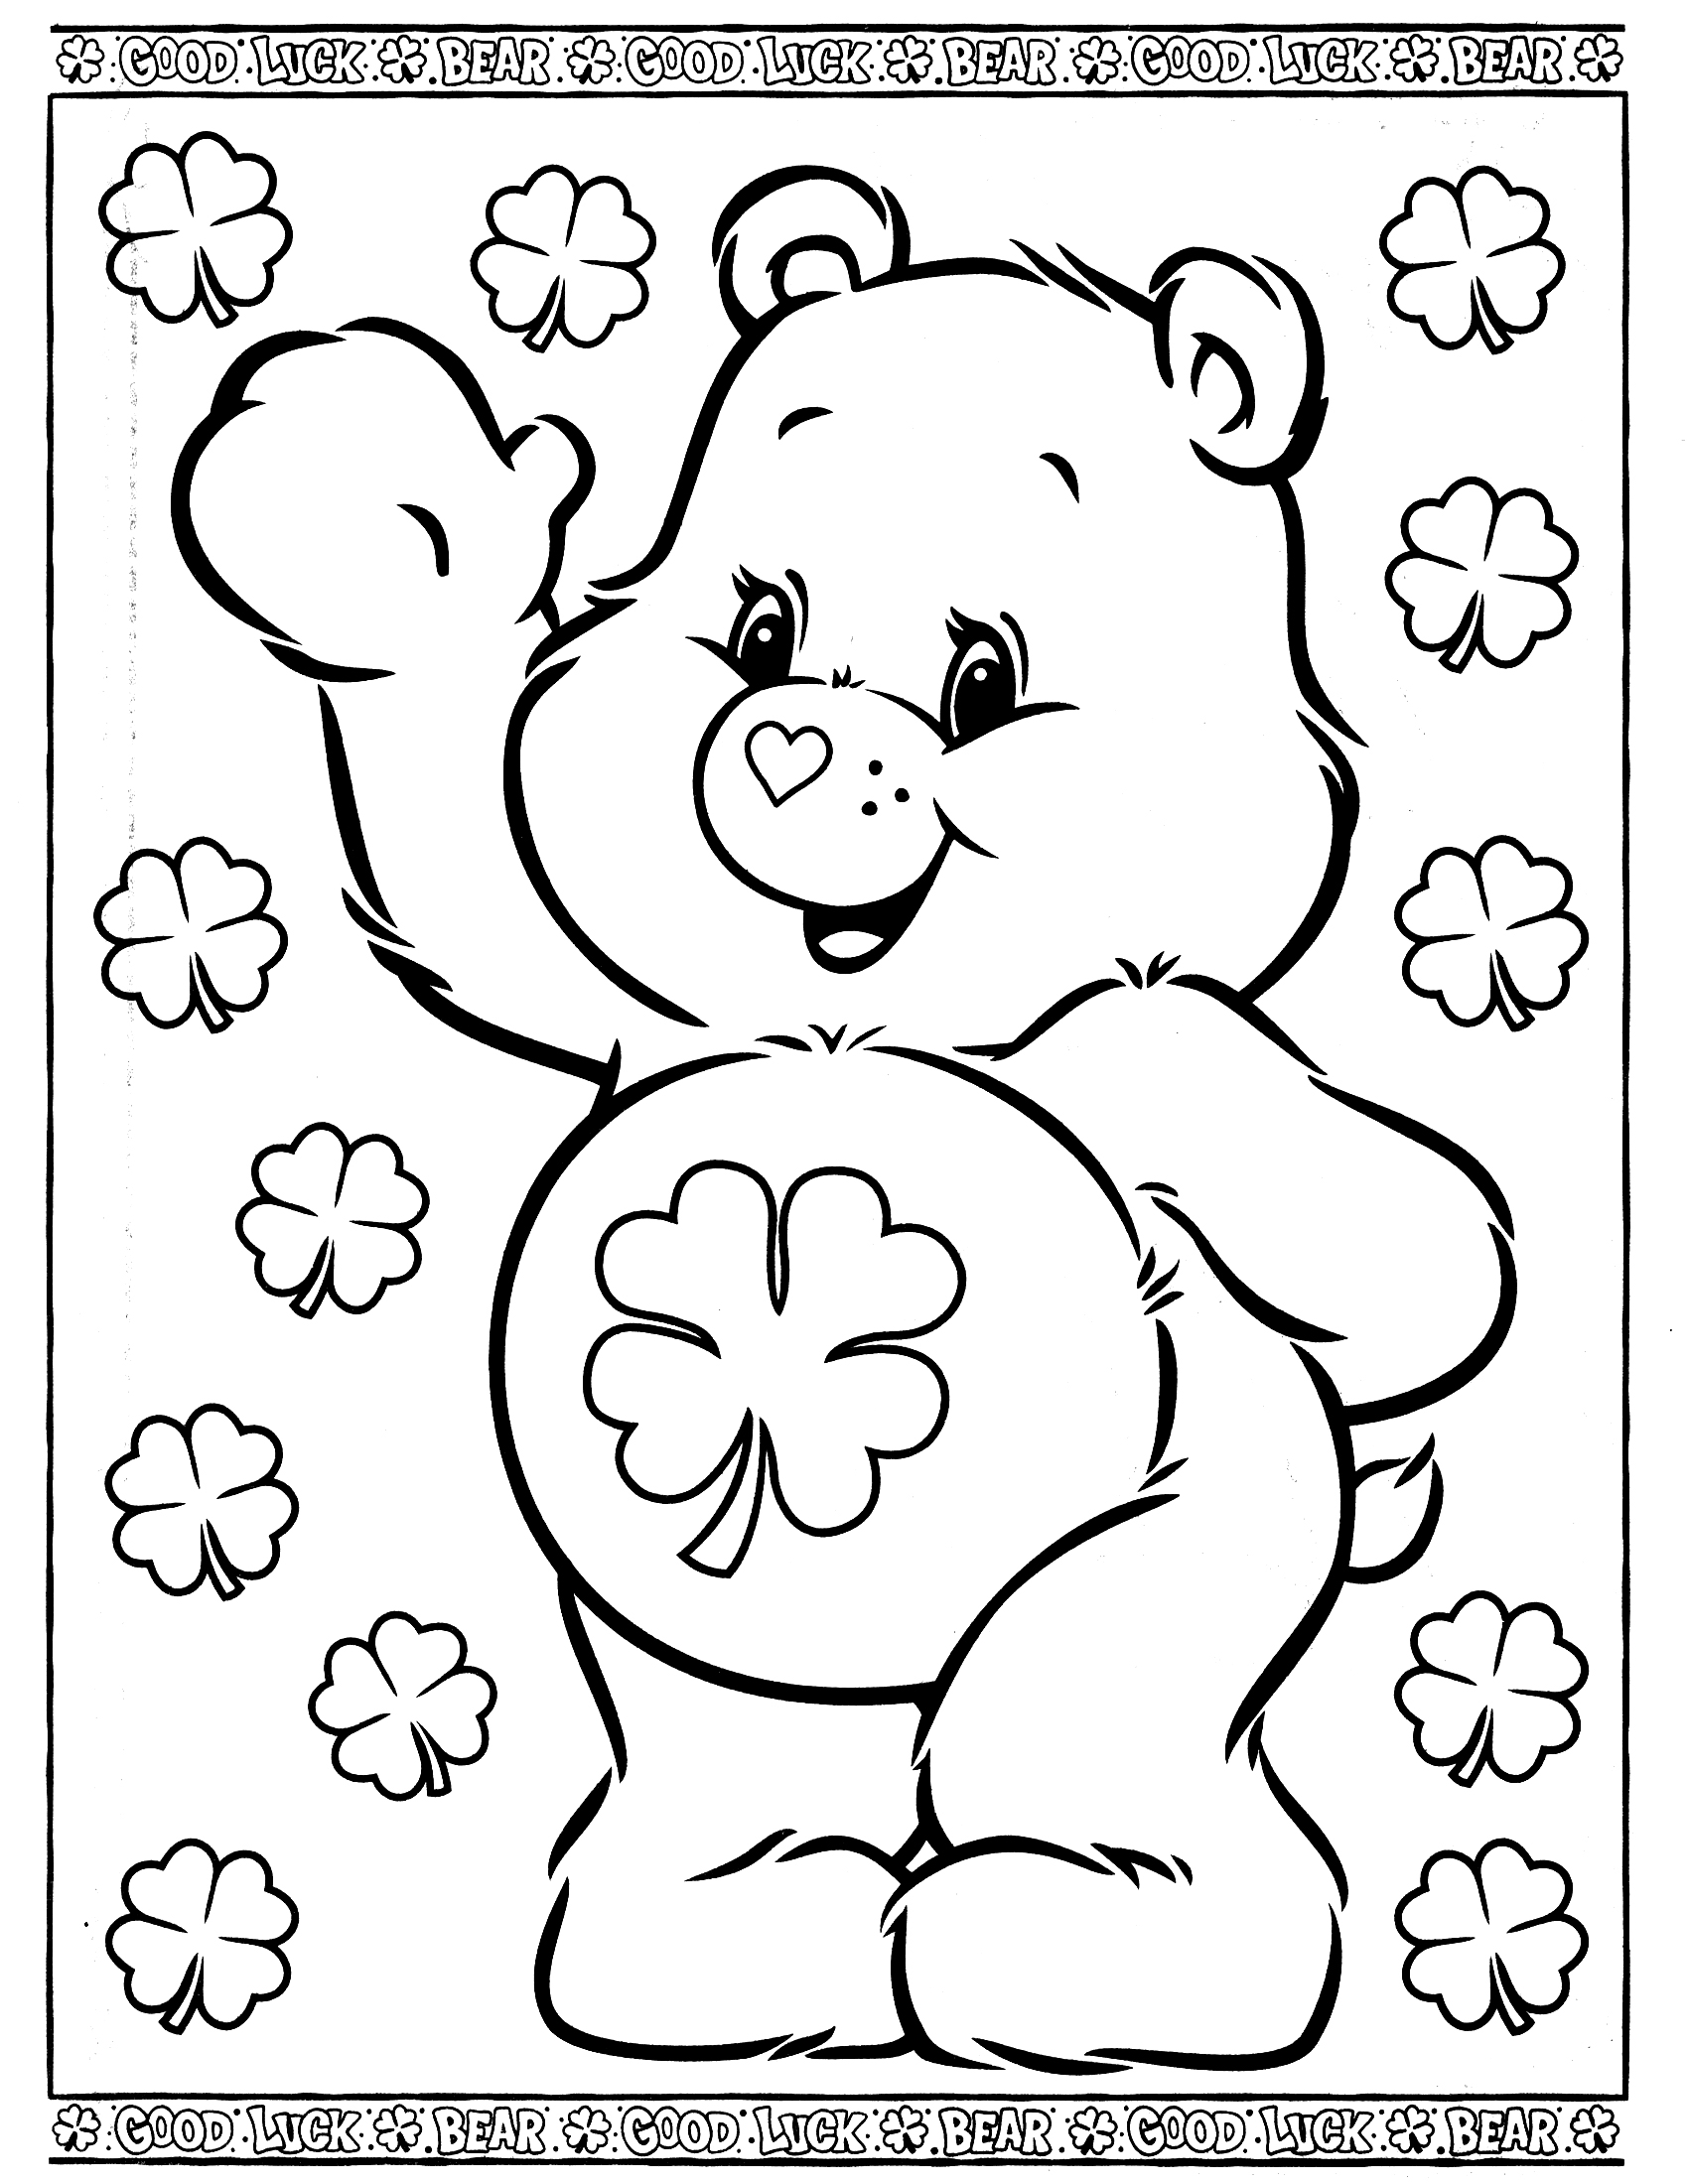 Drawing Care Bears 37148 (Cartoons) Printable coloring pages